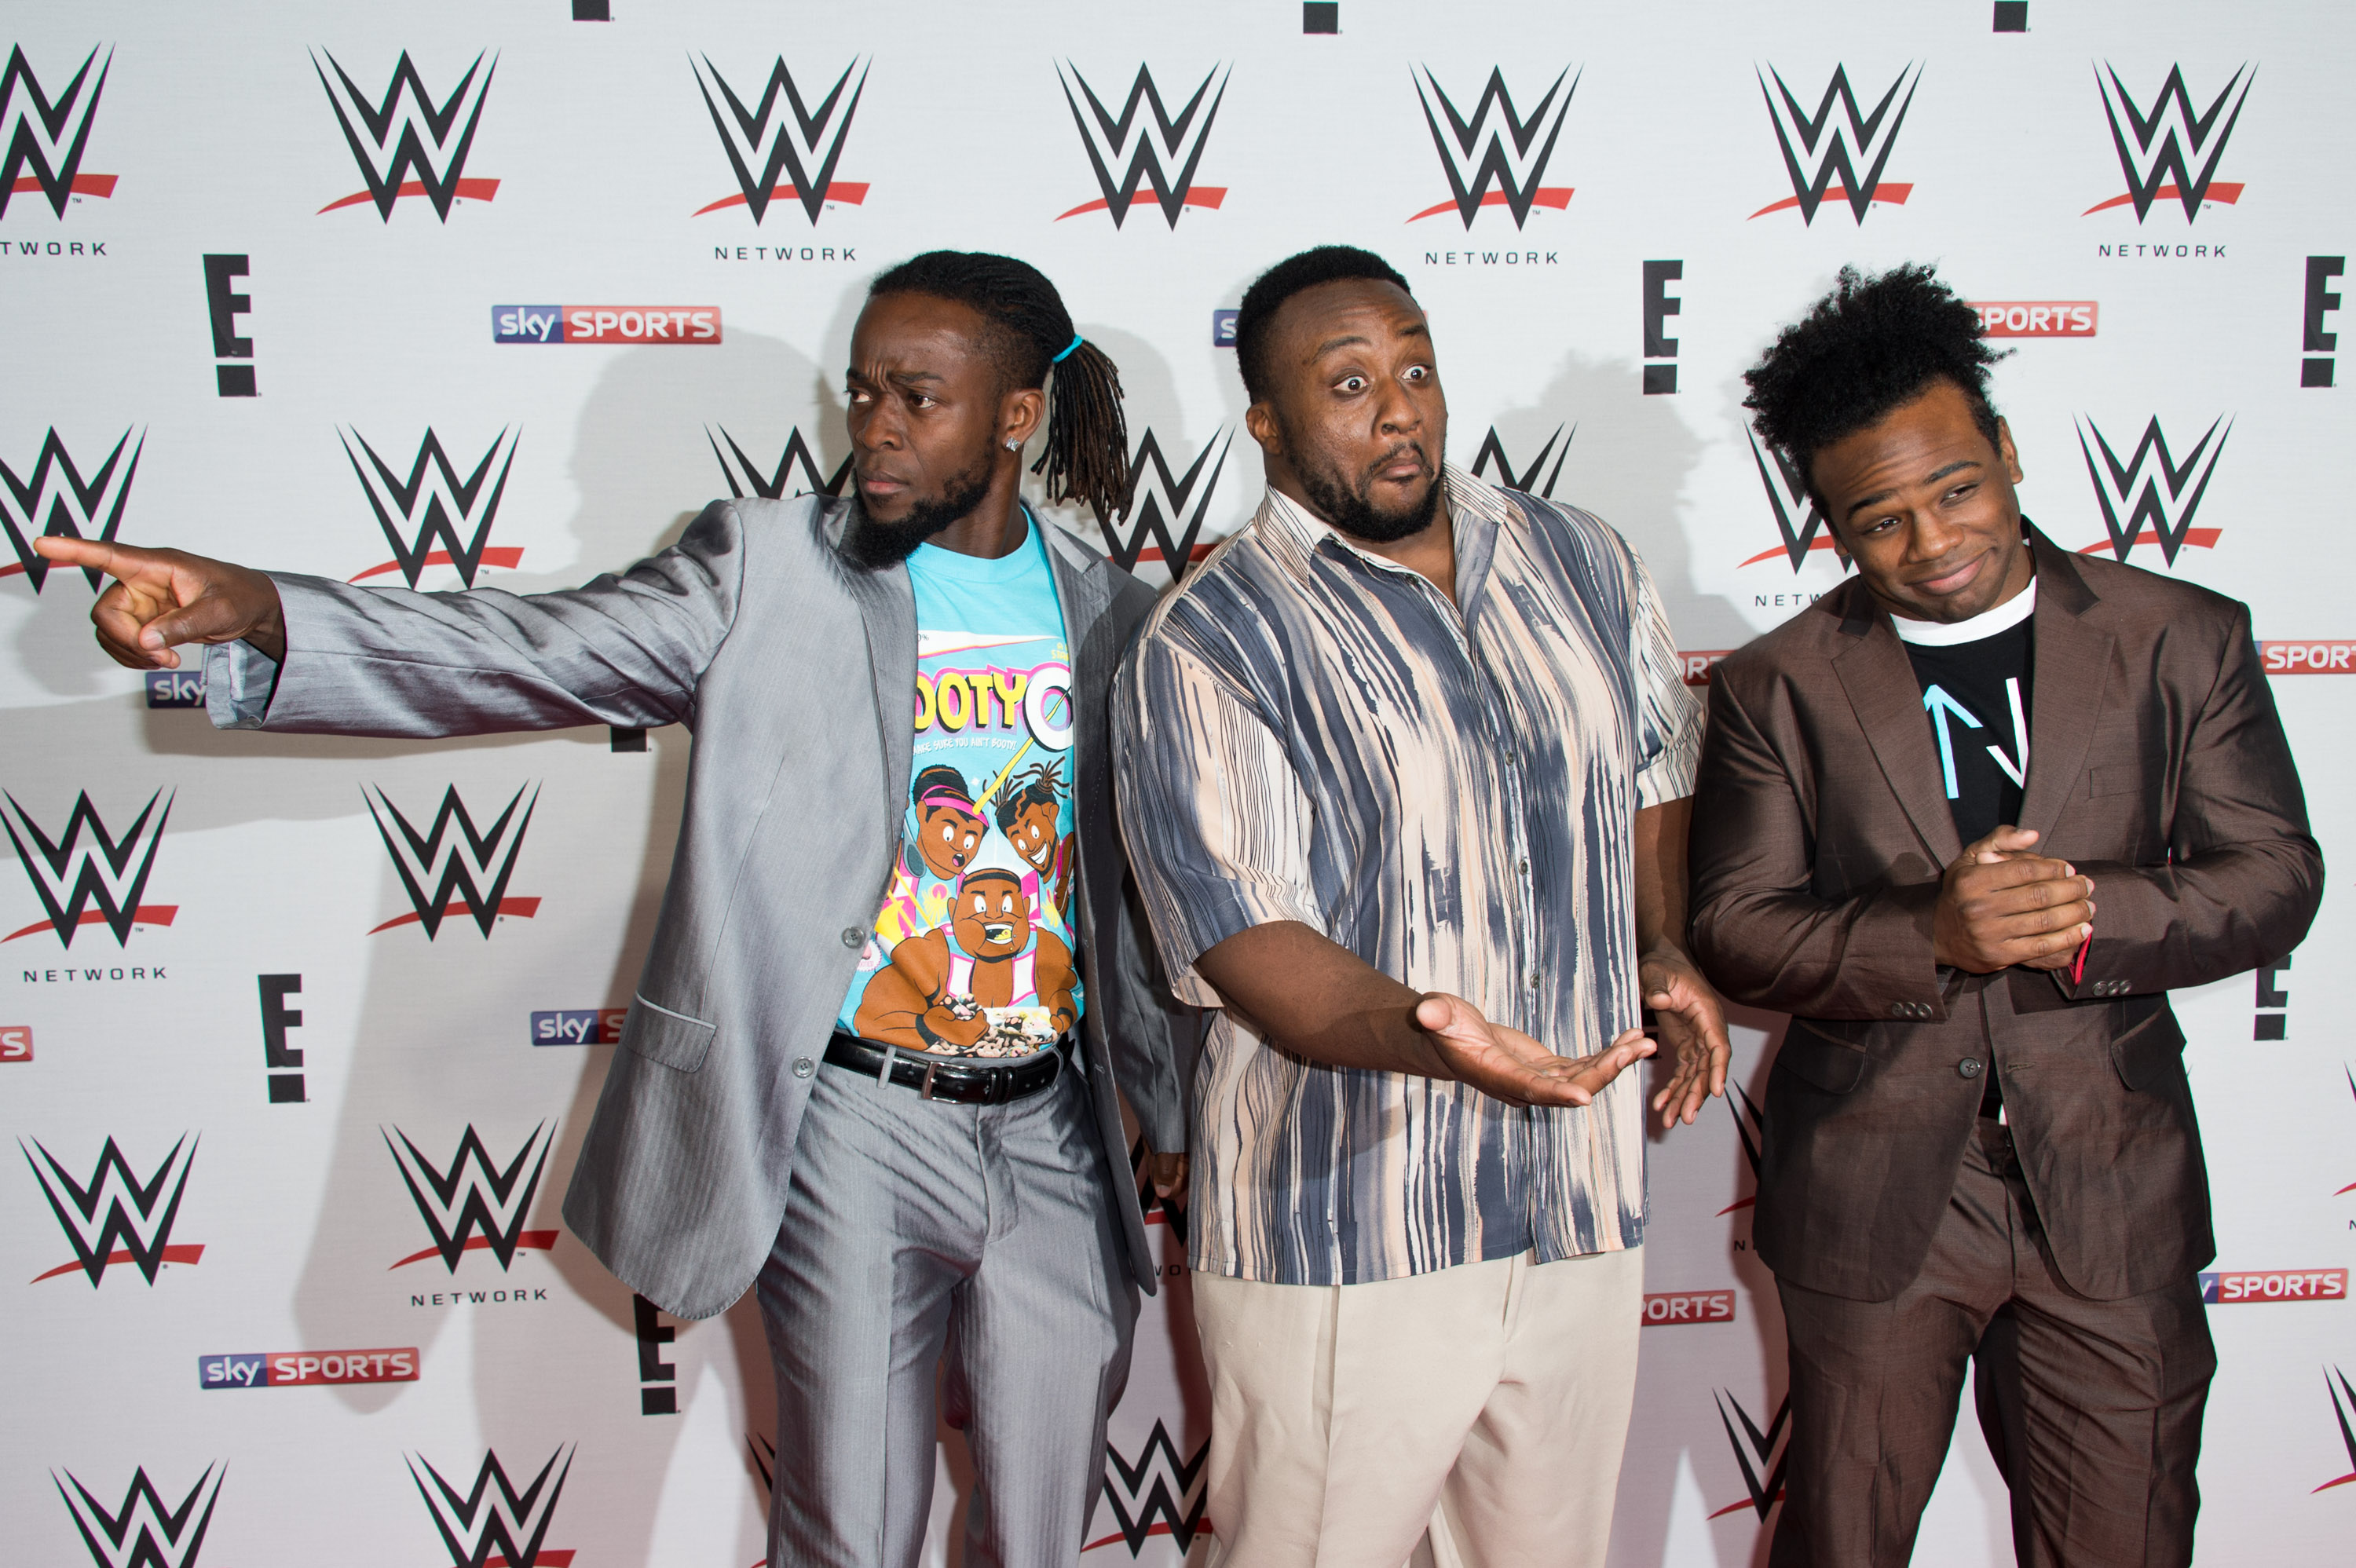 The New Day #13